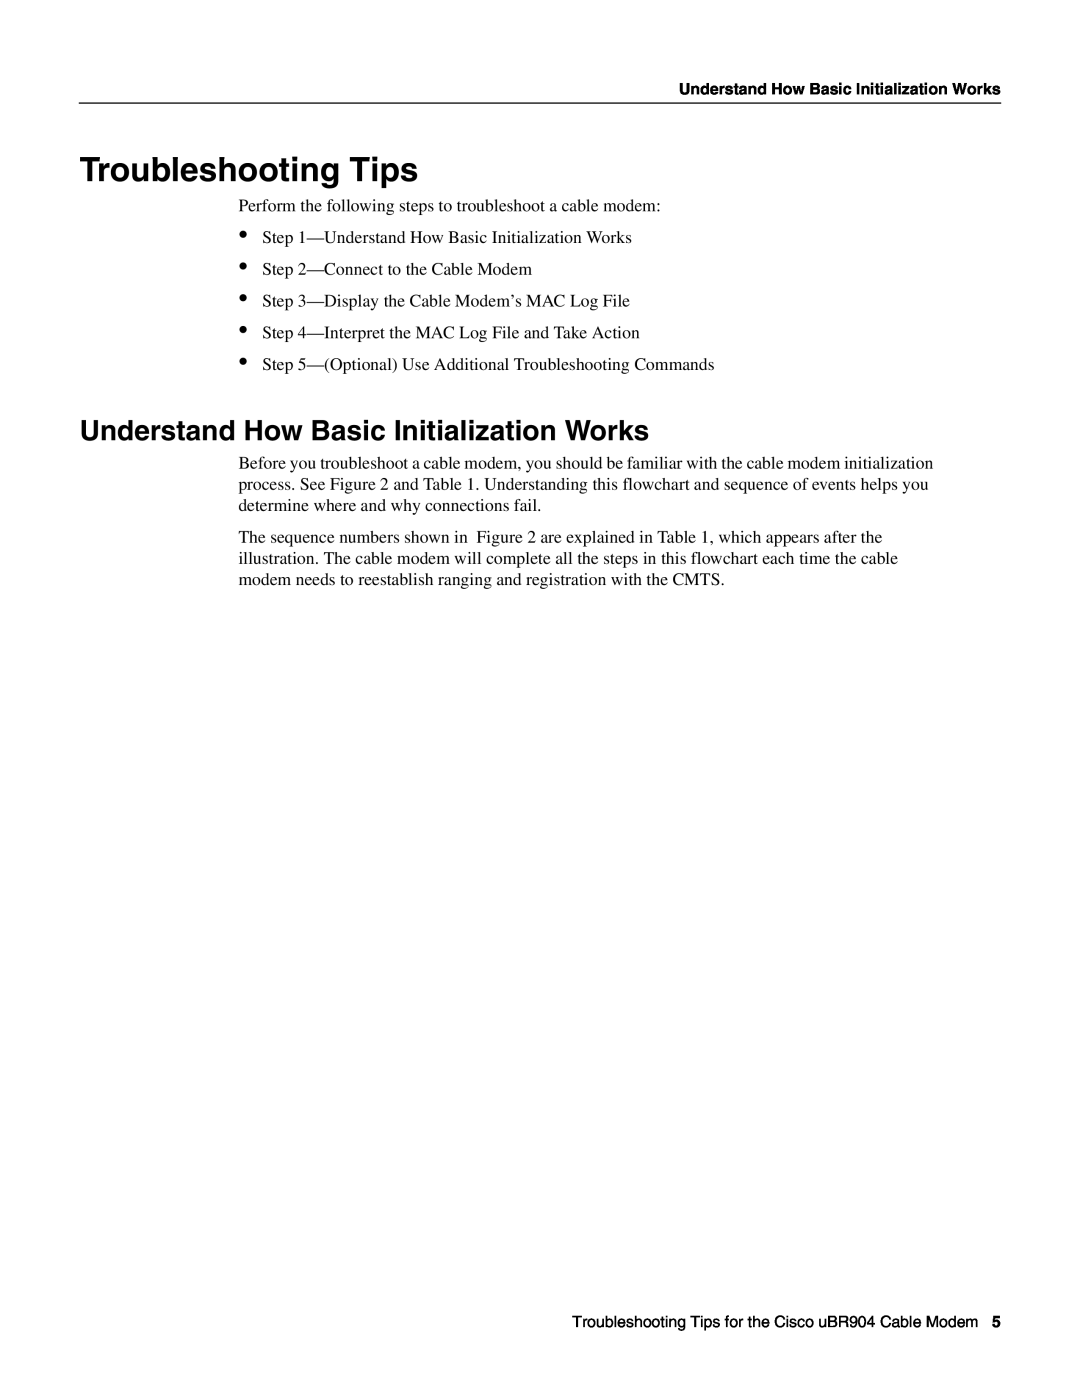 Cisco Systems UBR904 manual Troubleshooting Tips, Understand How Basic Initialization Works 